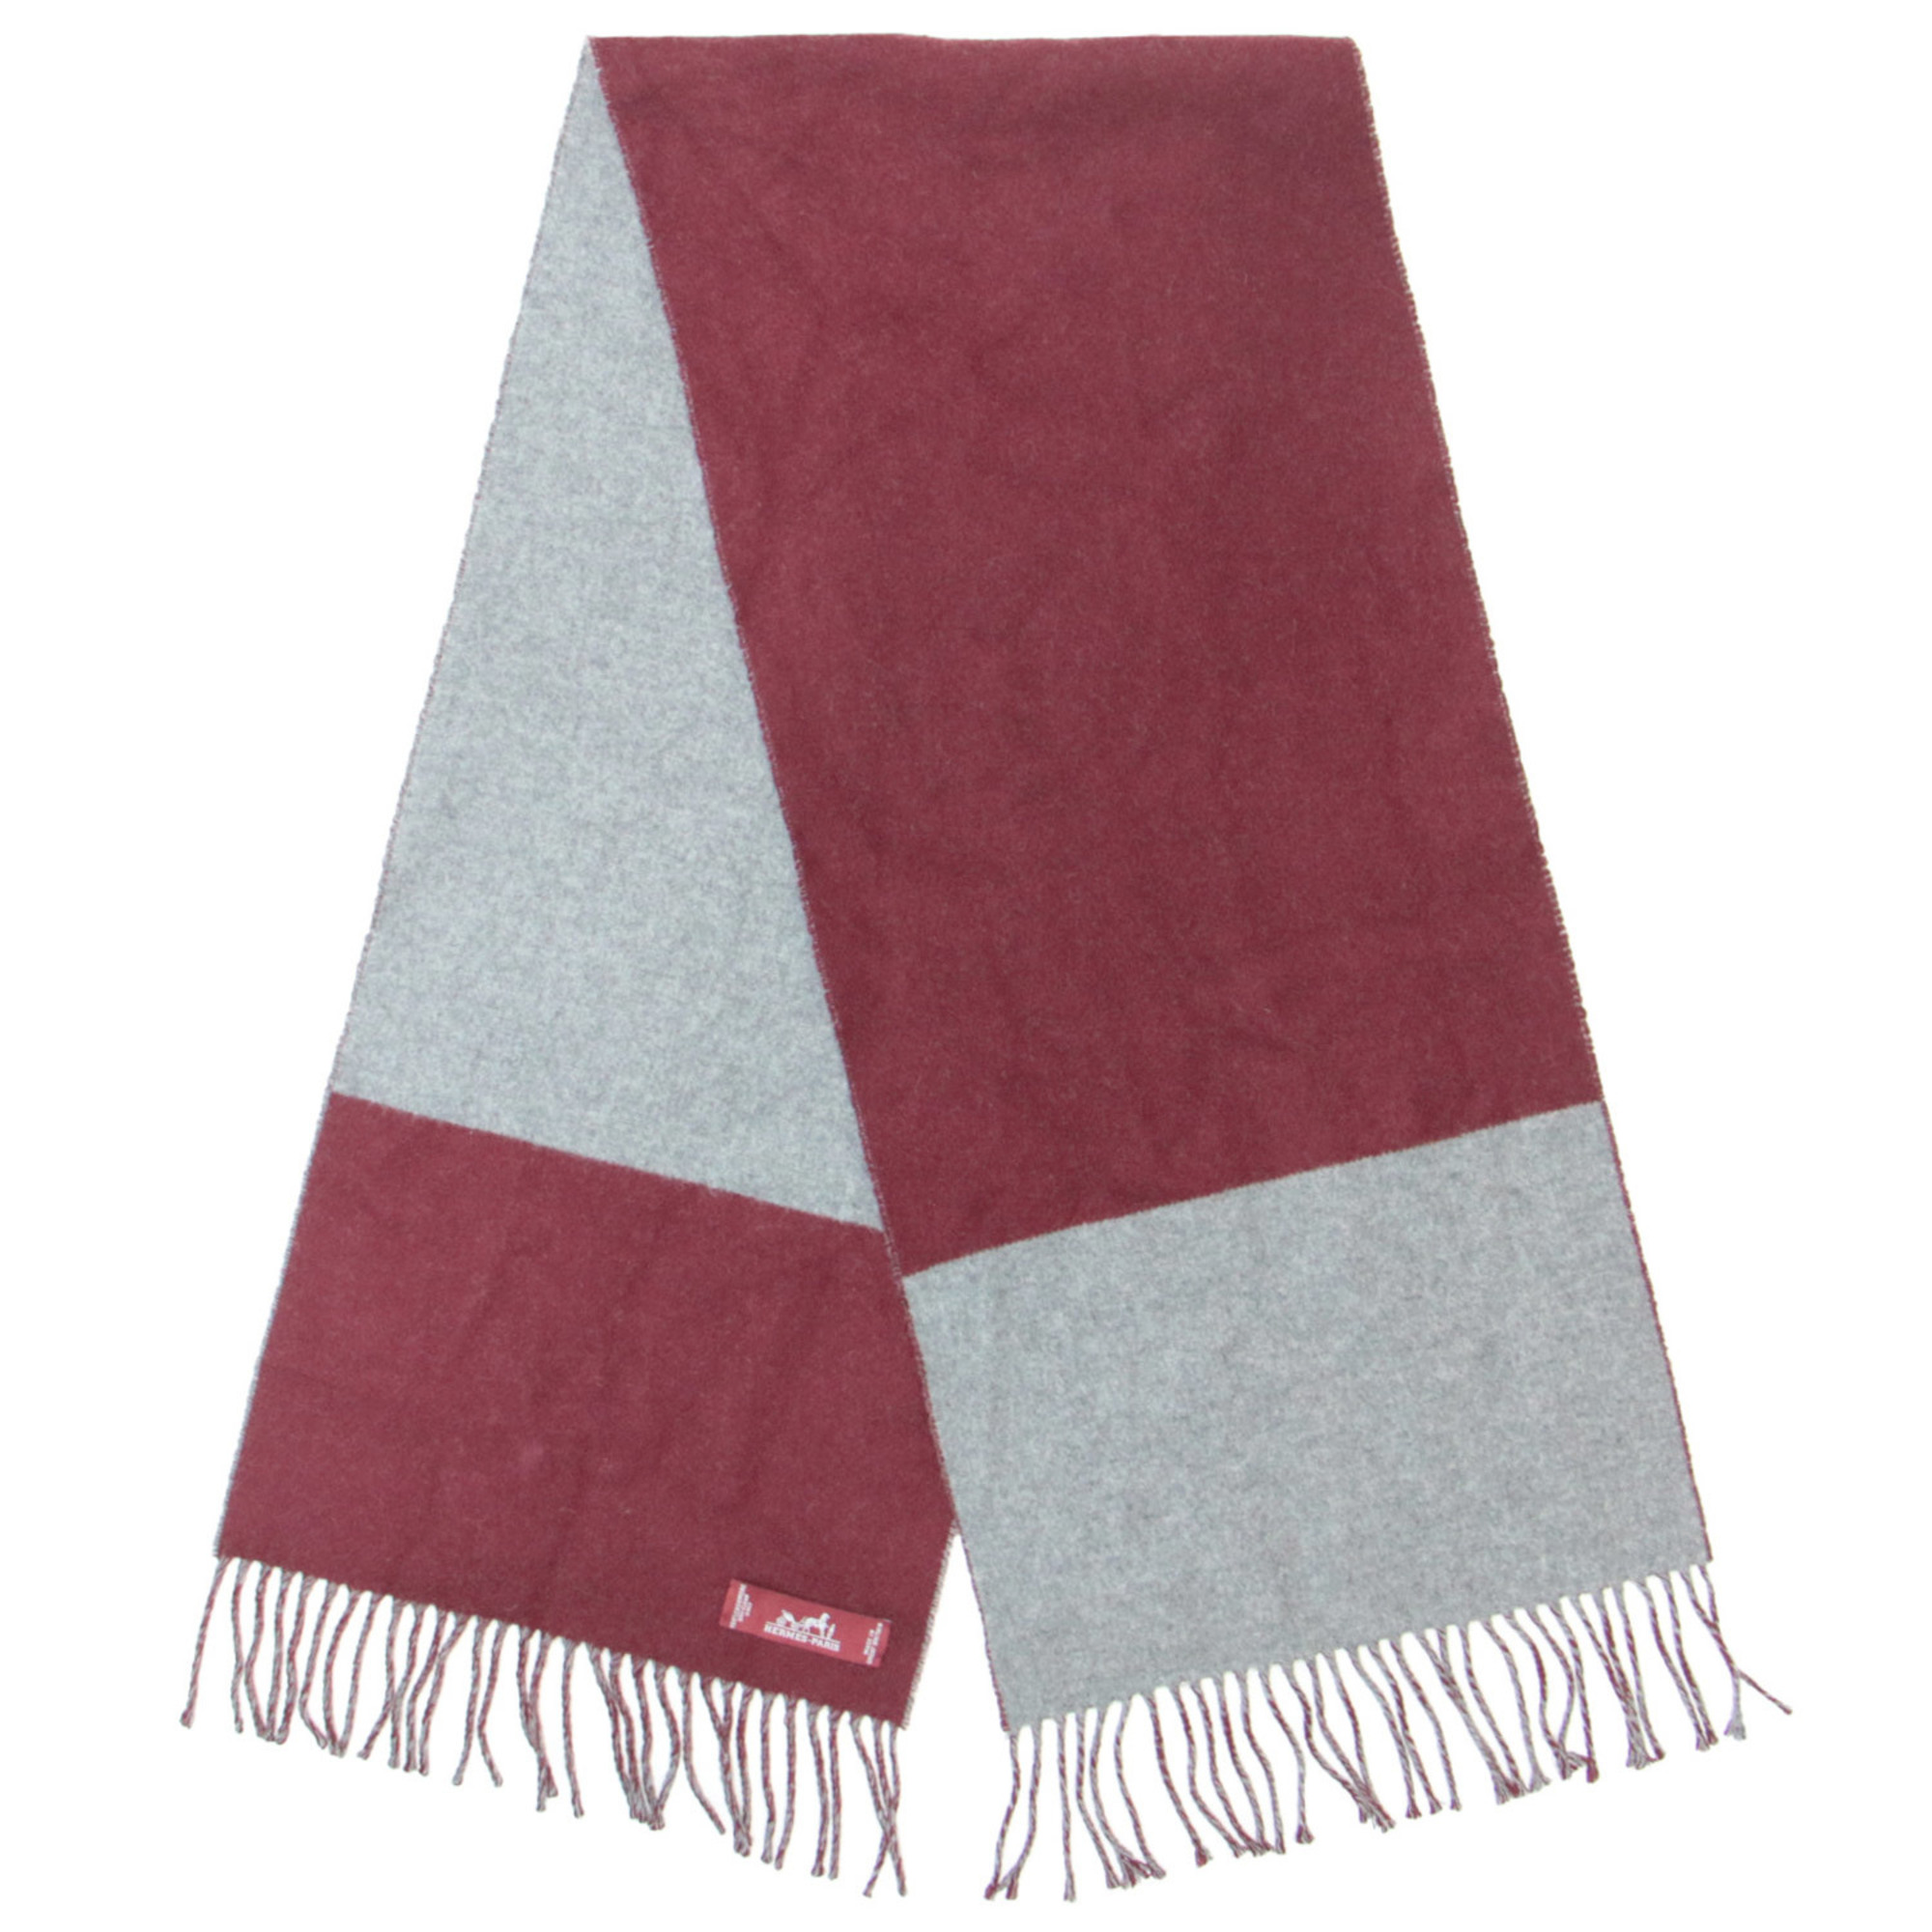 HERMES Muffler 22 Fall/Winter Bordeaux Gray FREE Bicolor Reversible Cashmere Kazak Adult Casual Cold Protection